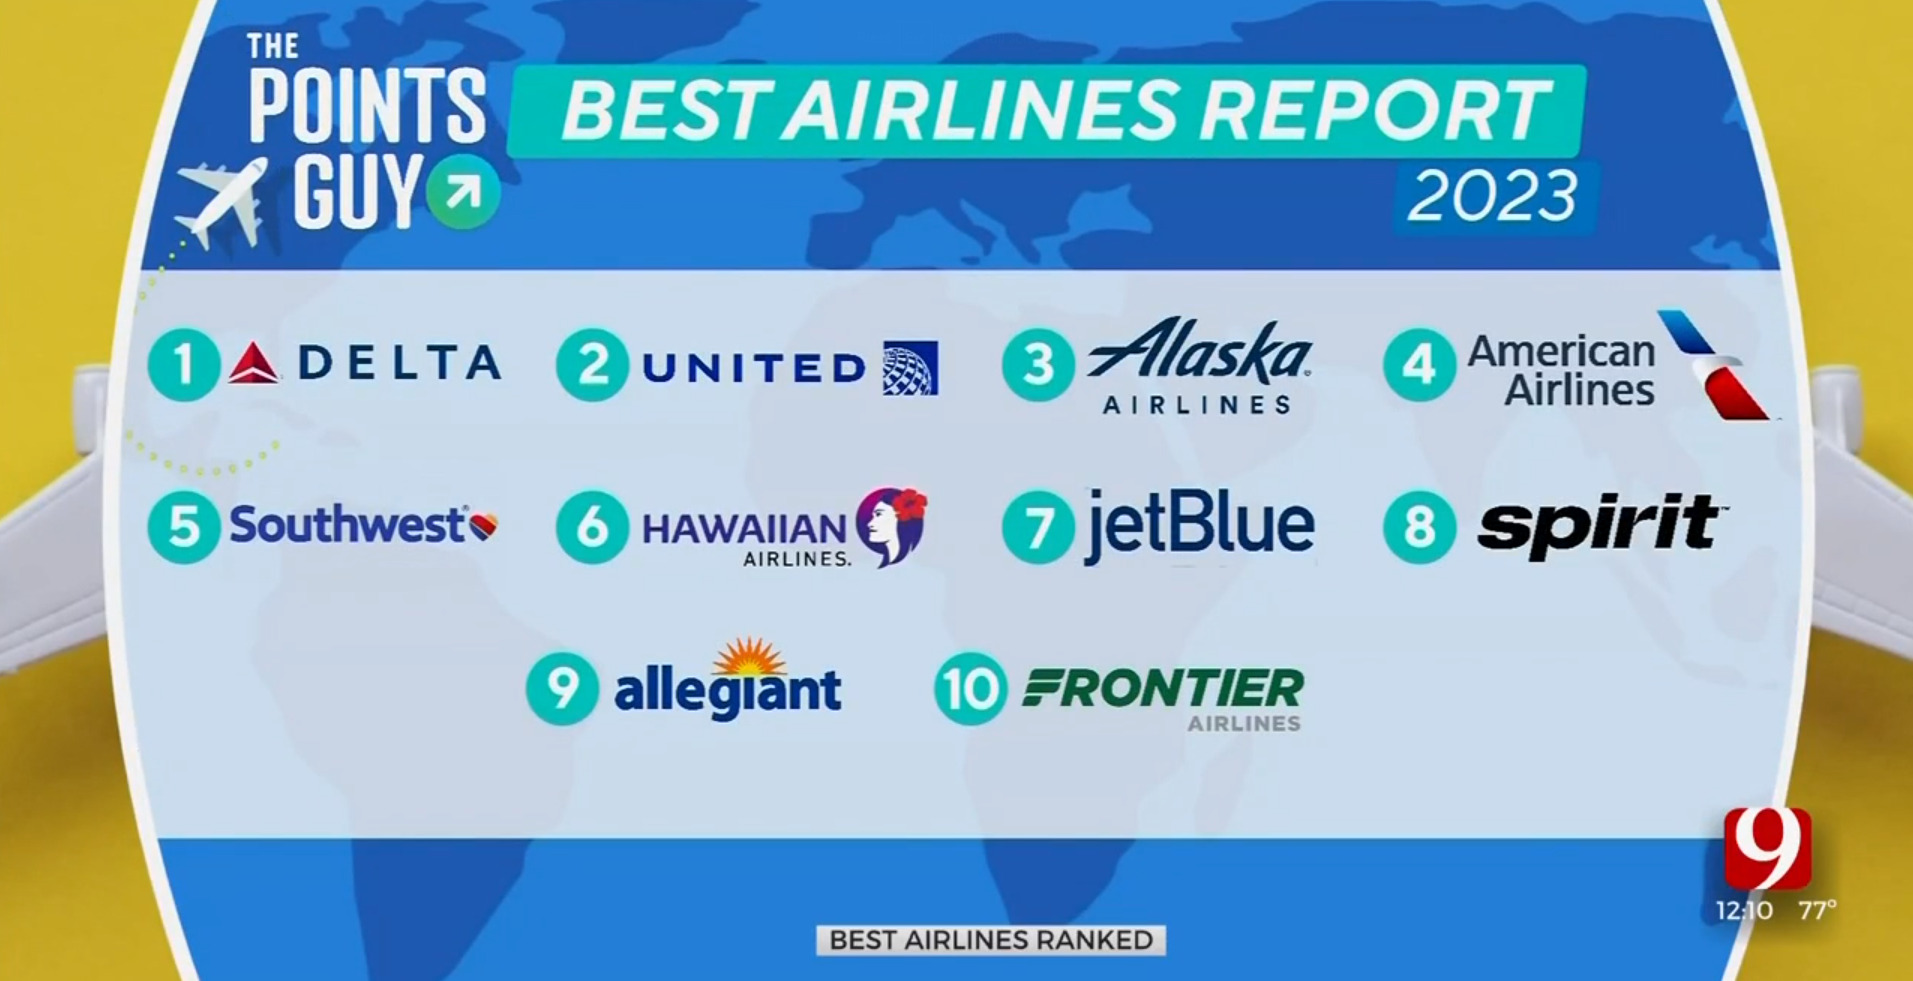 Delta Named Best U.S. Airline Of 2023 By The Points Guy For 5th Year In A Row